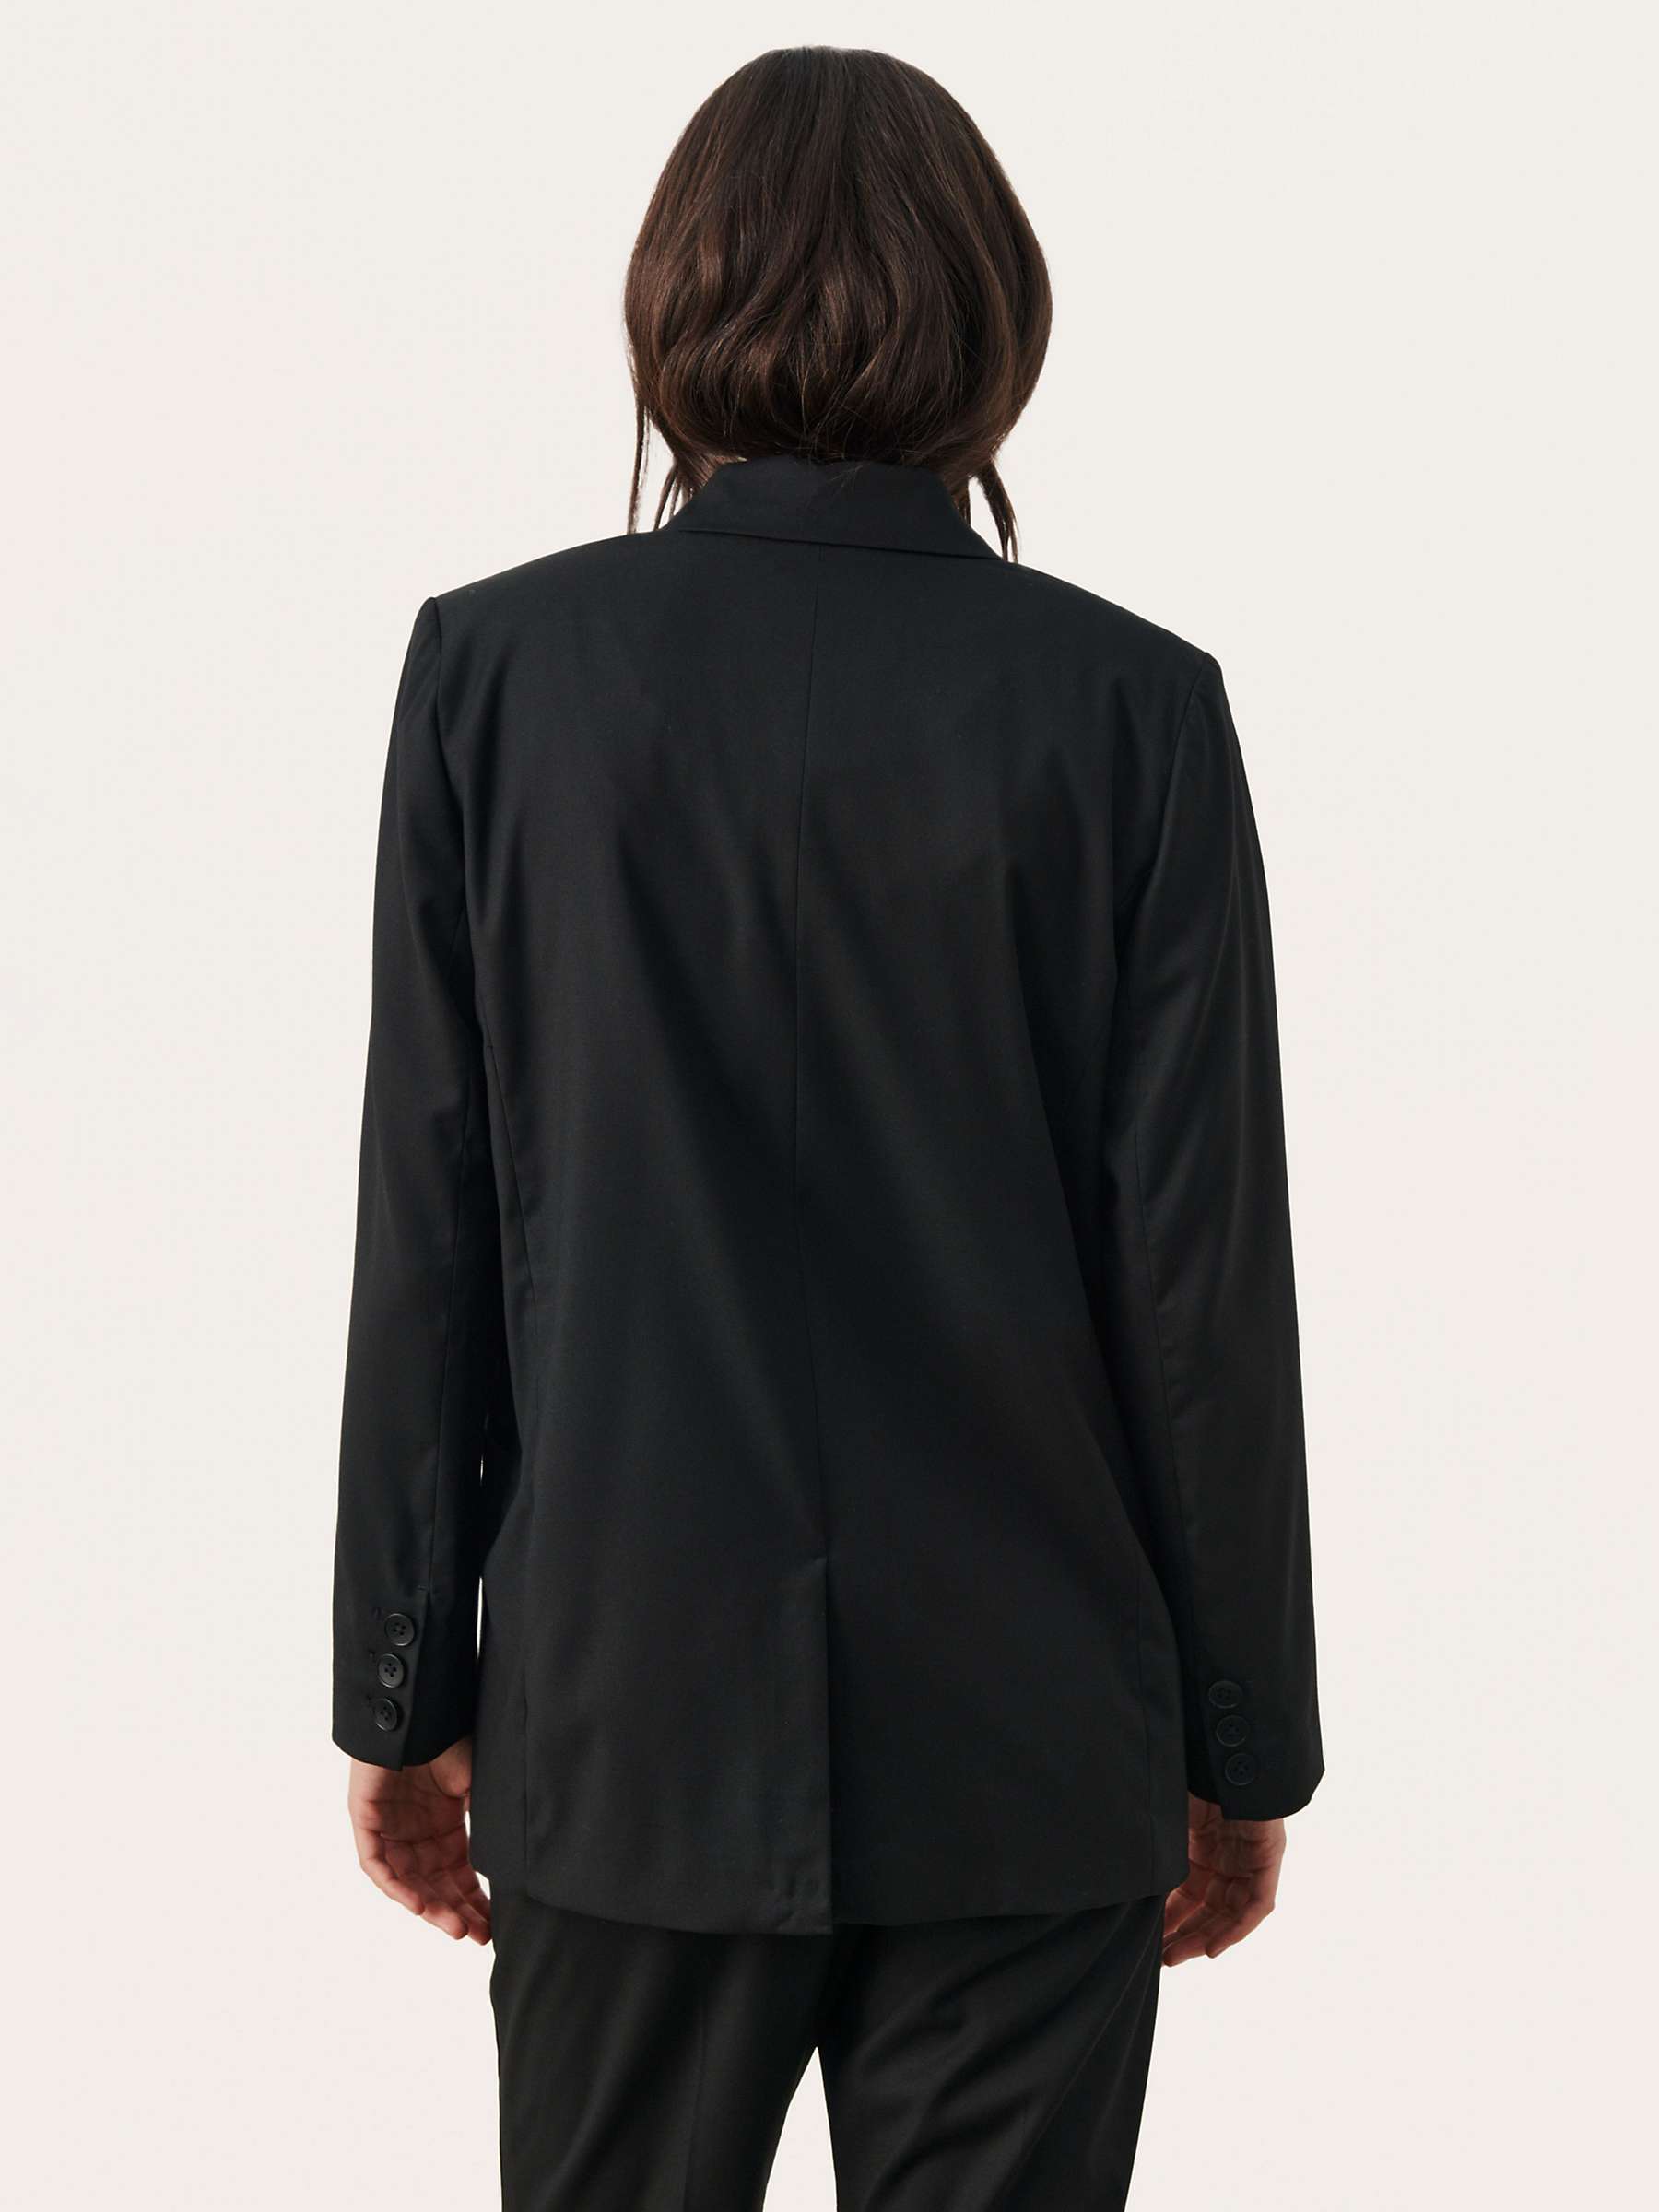 Buy Part Two Dafne Double Breasted Blazer, Black Online at johnlewis.com